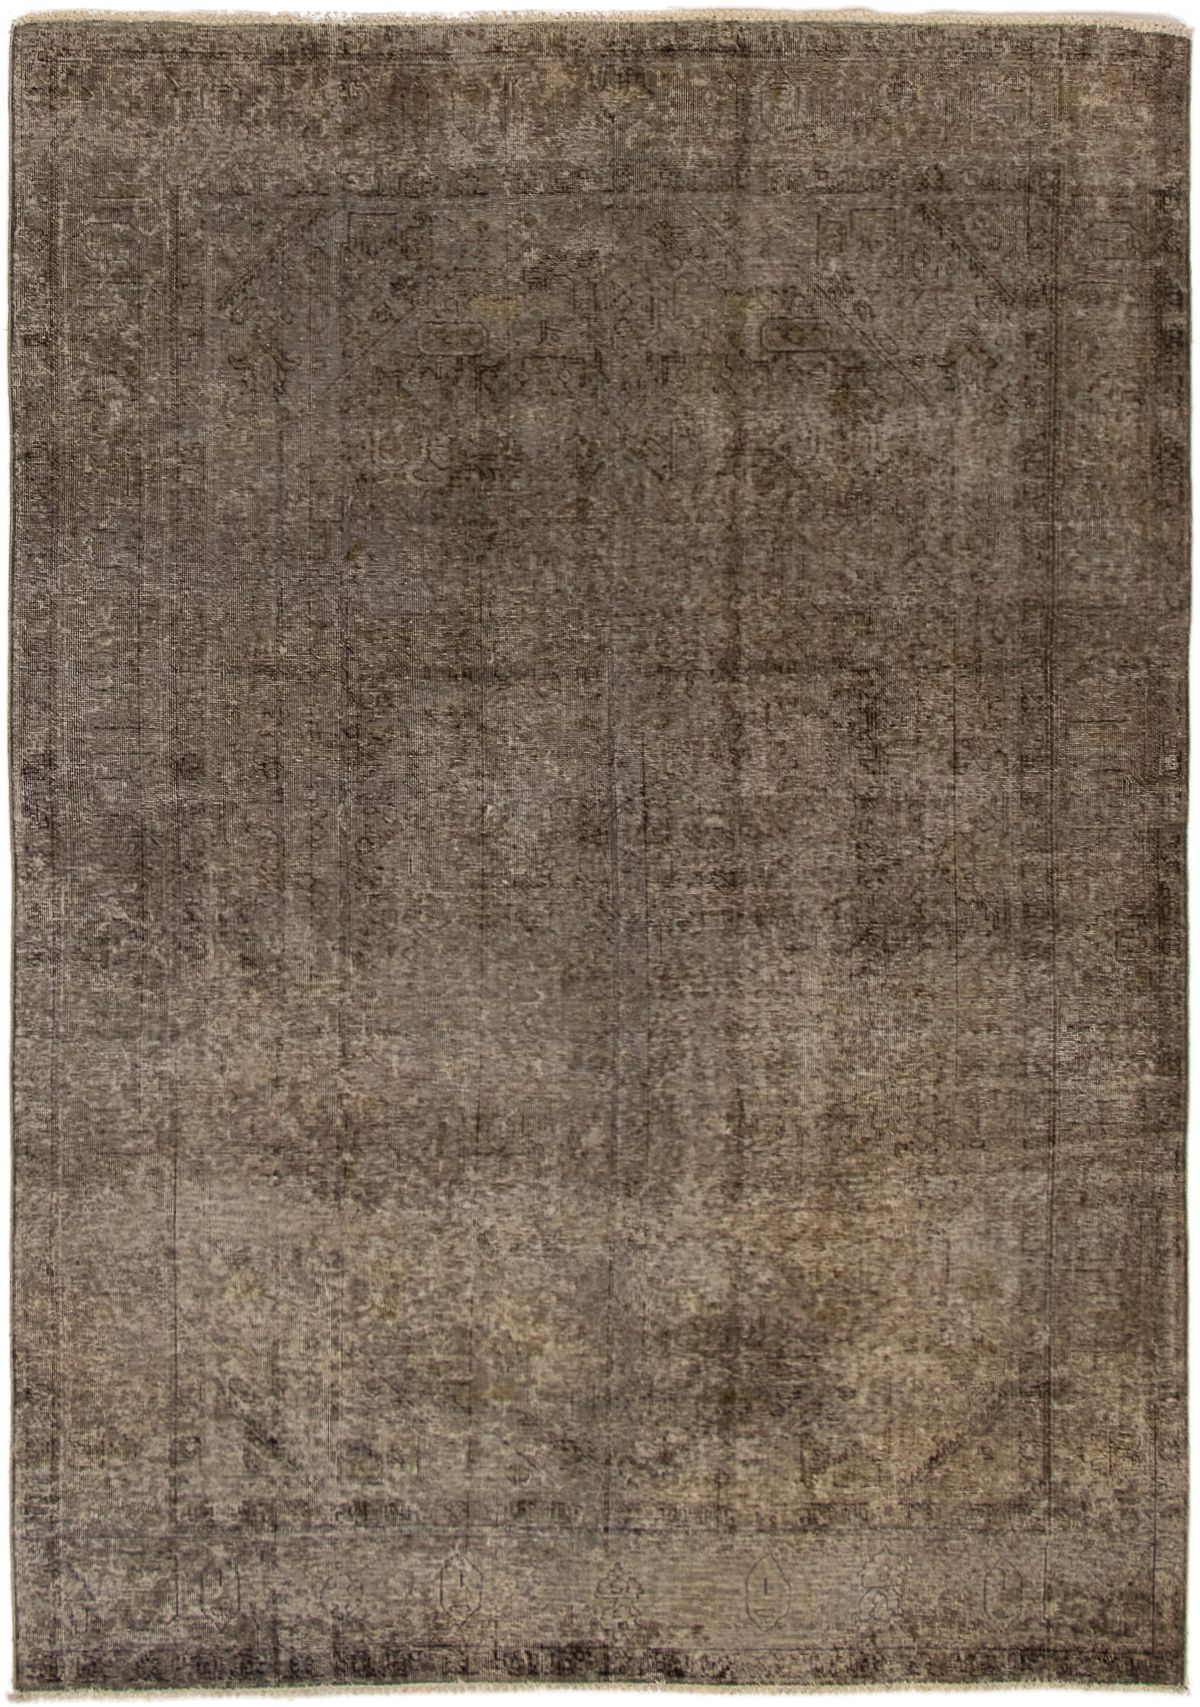 Hand-knotted Color Transition Dark Brown, Khaki Wool Rug 6'9" x 9'7" Size: 6'9" x 9'7"  